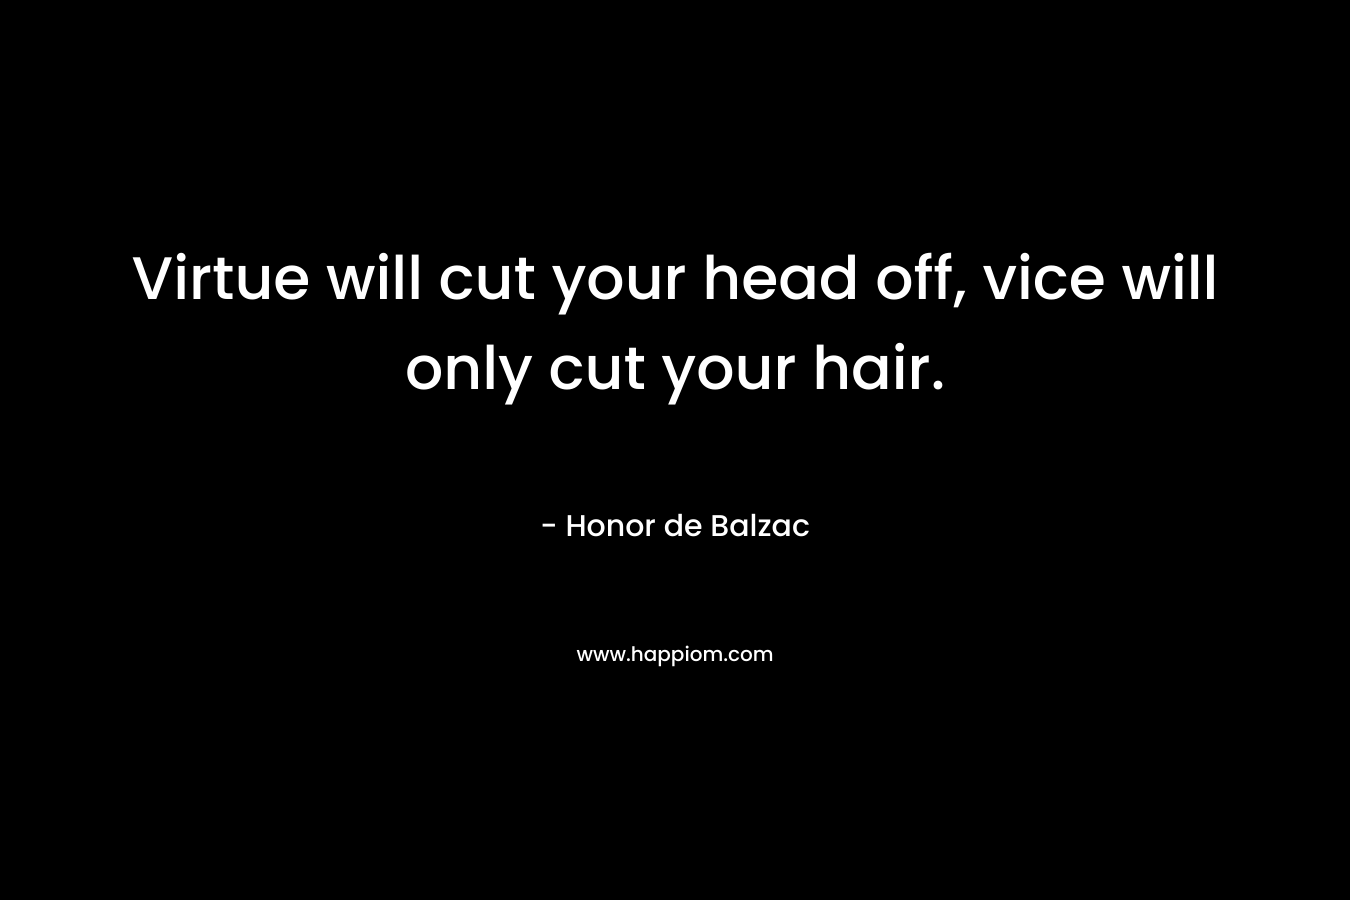 Virtue will cut your head off, vice will only cut your hair.